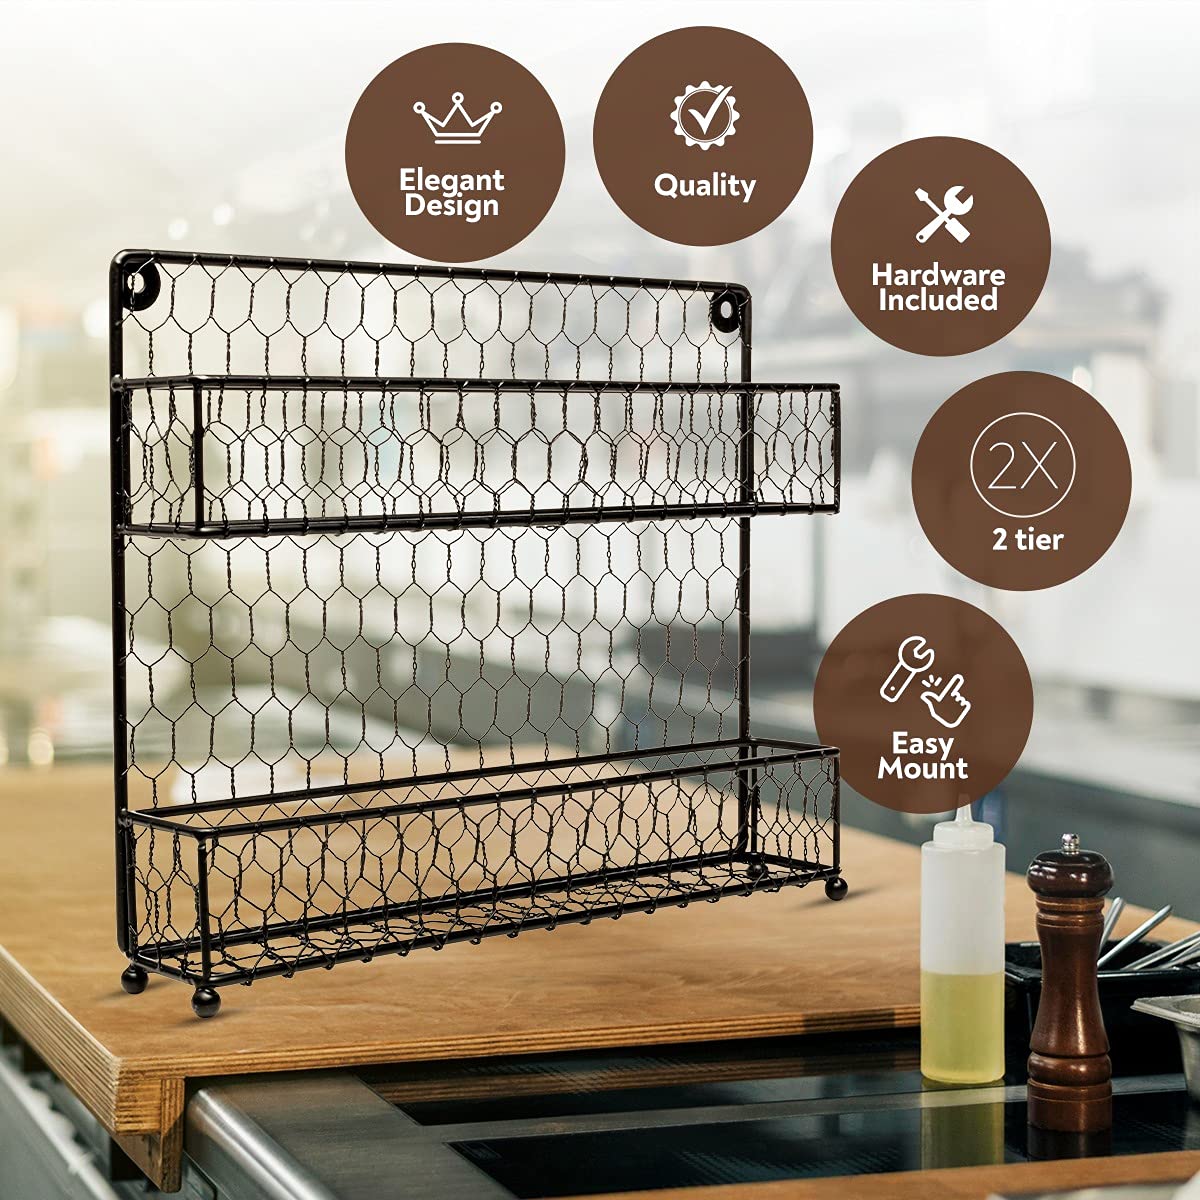 Homeries 2 Tier Wall Spice Rack For Kitchens | Stylish Wall Mounted Spices And Seasonings Storage Rack | Organize Your Home, Eliminate Clutter & Add Some Beautiful Rustic Decor To Your Walls  - Like New